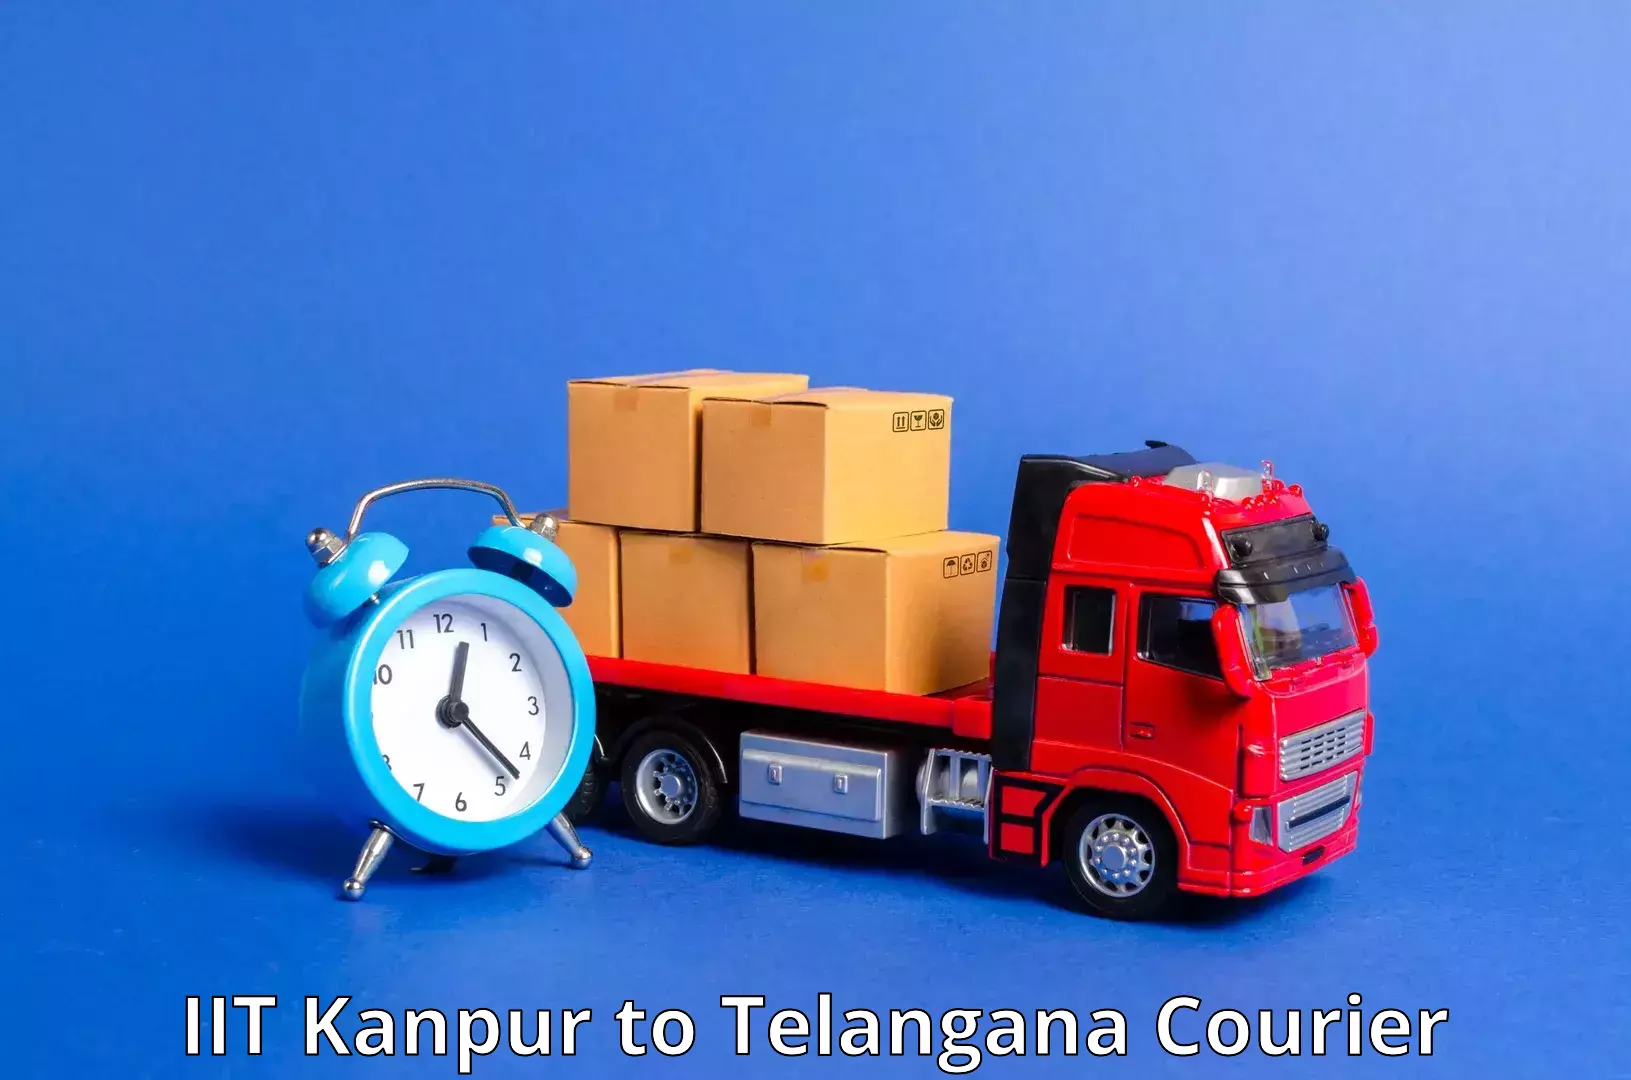 Business delivery service IIT Kanpur to Telangana